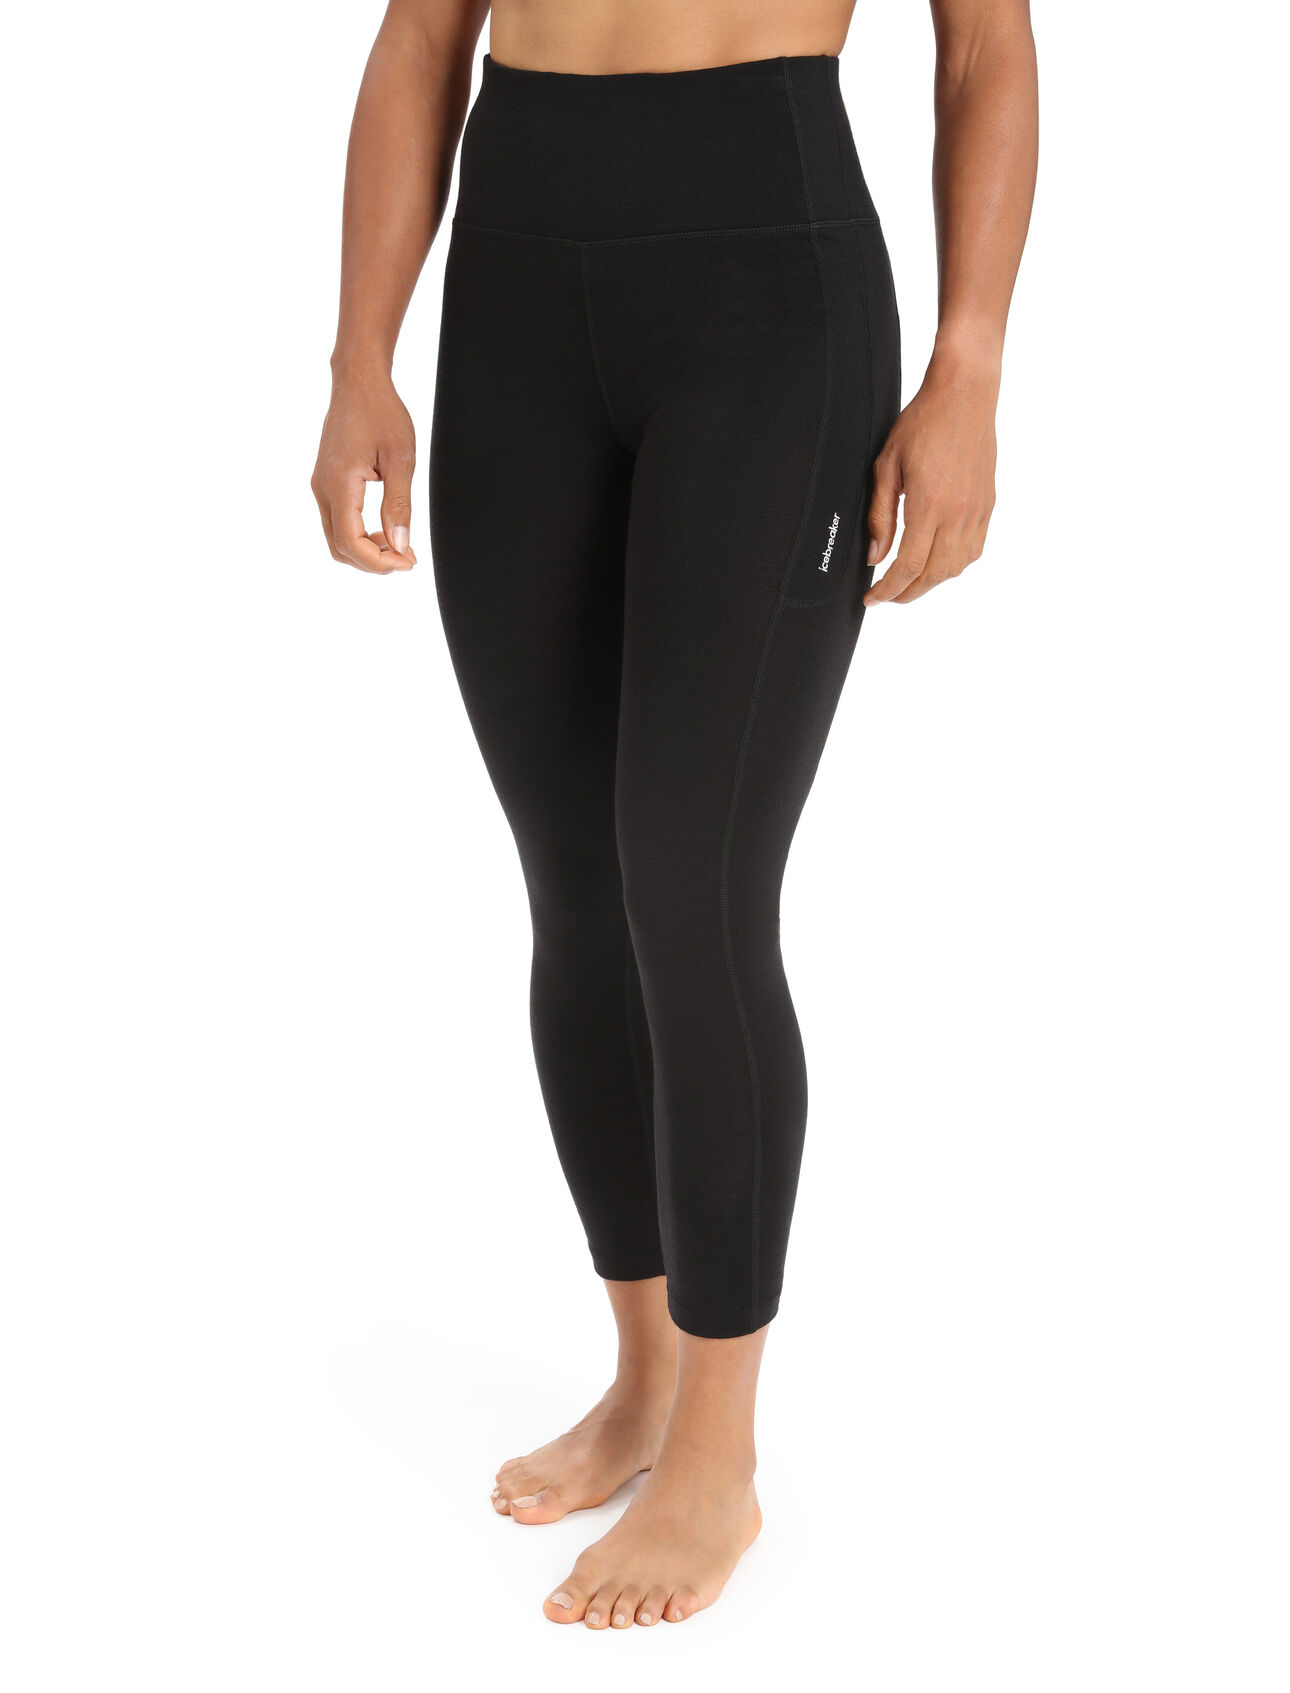 Womens Merino Fastray High Rise Tights Functional, form-fitting bottoms for active performance on or off the trail, the Fastray High Rise Tights feature a stretchy merino wool blend with a high waist for added coverage.